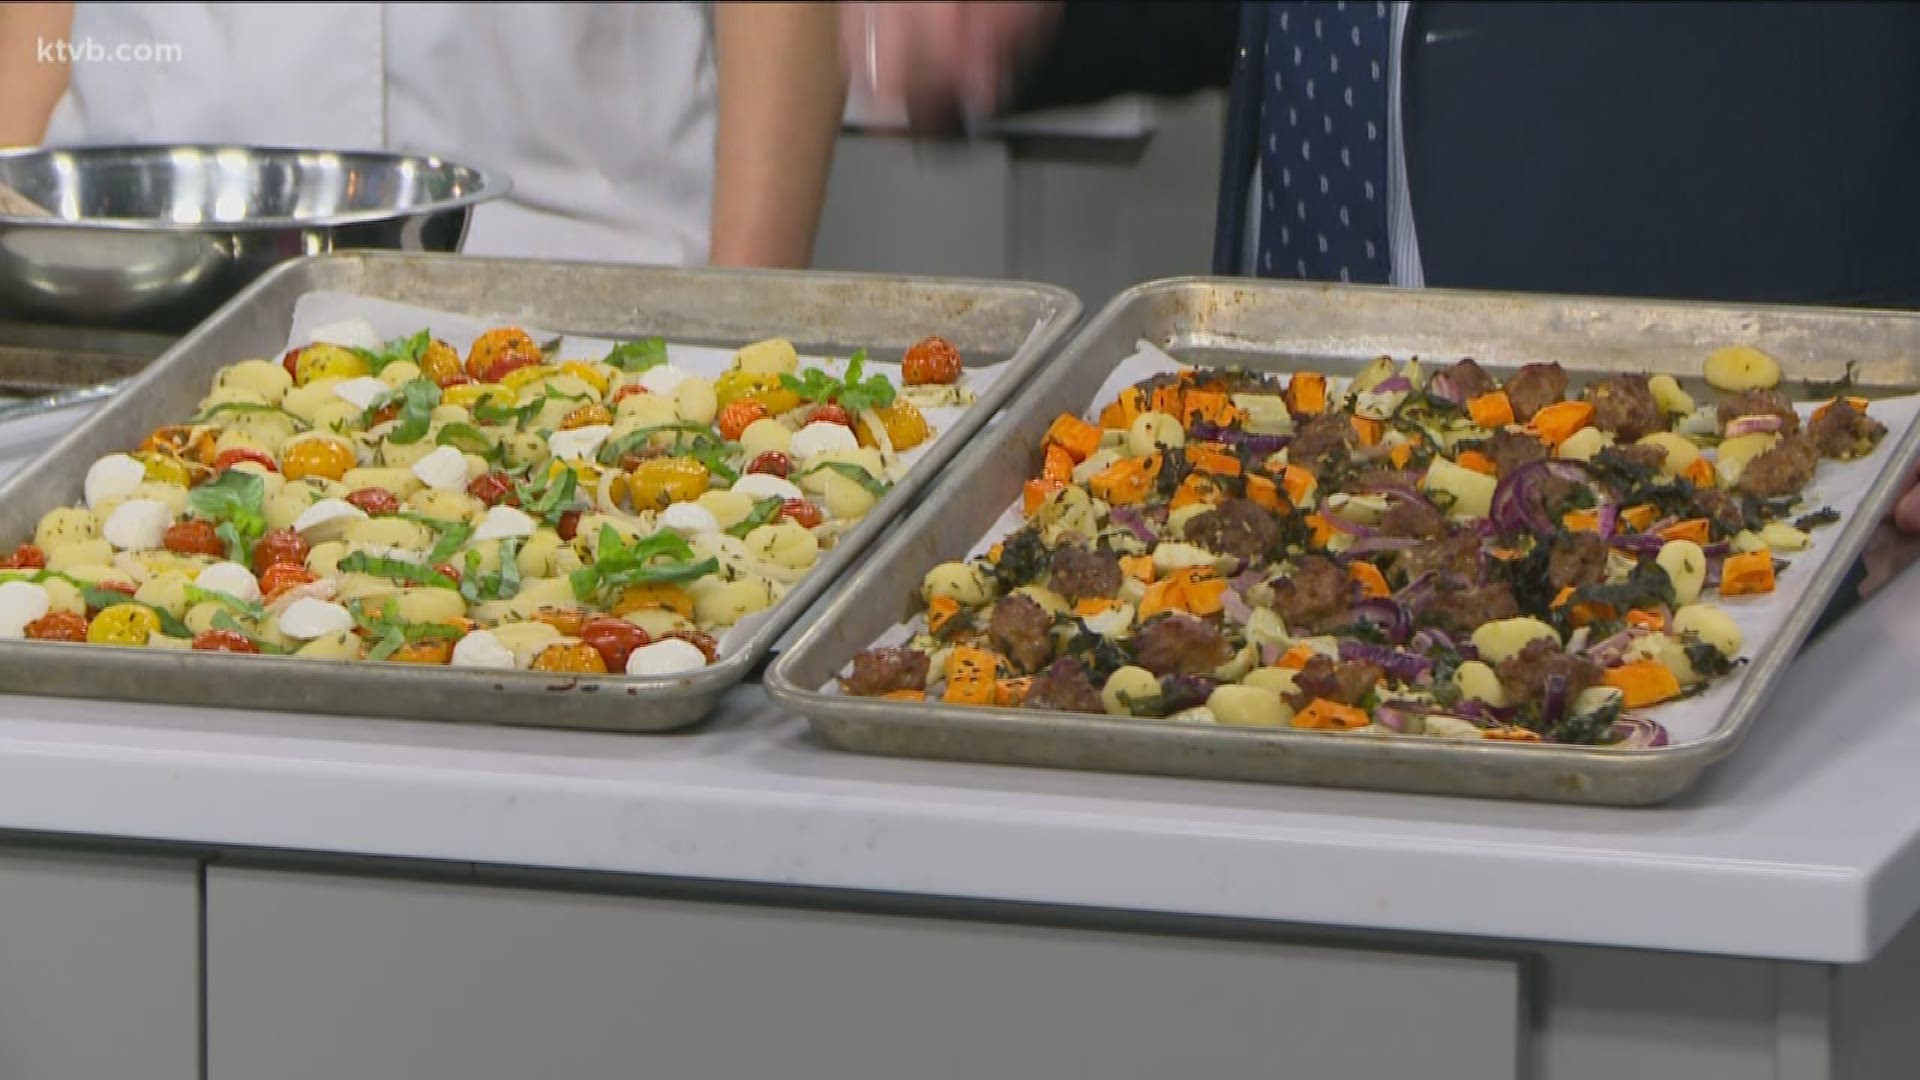 Chef Christina Murray was in the KTVB Kitchen to show us how to make this simple recipes for your family.